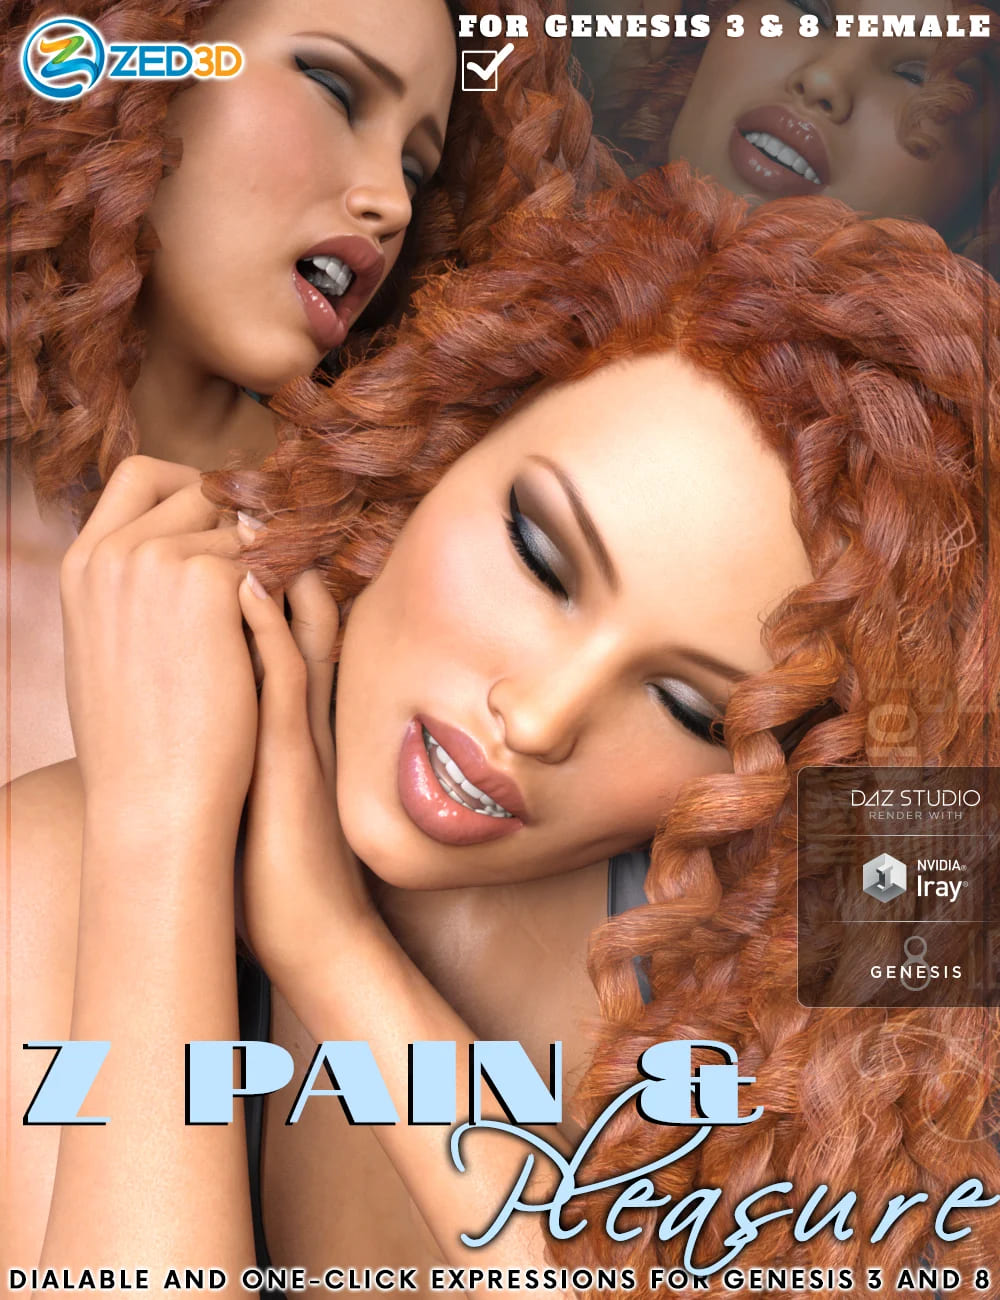 Z Pain and Pleasure Expressions for Genesis 3 and 8 Female_DAZ3DDL